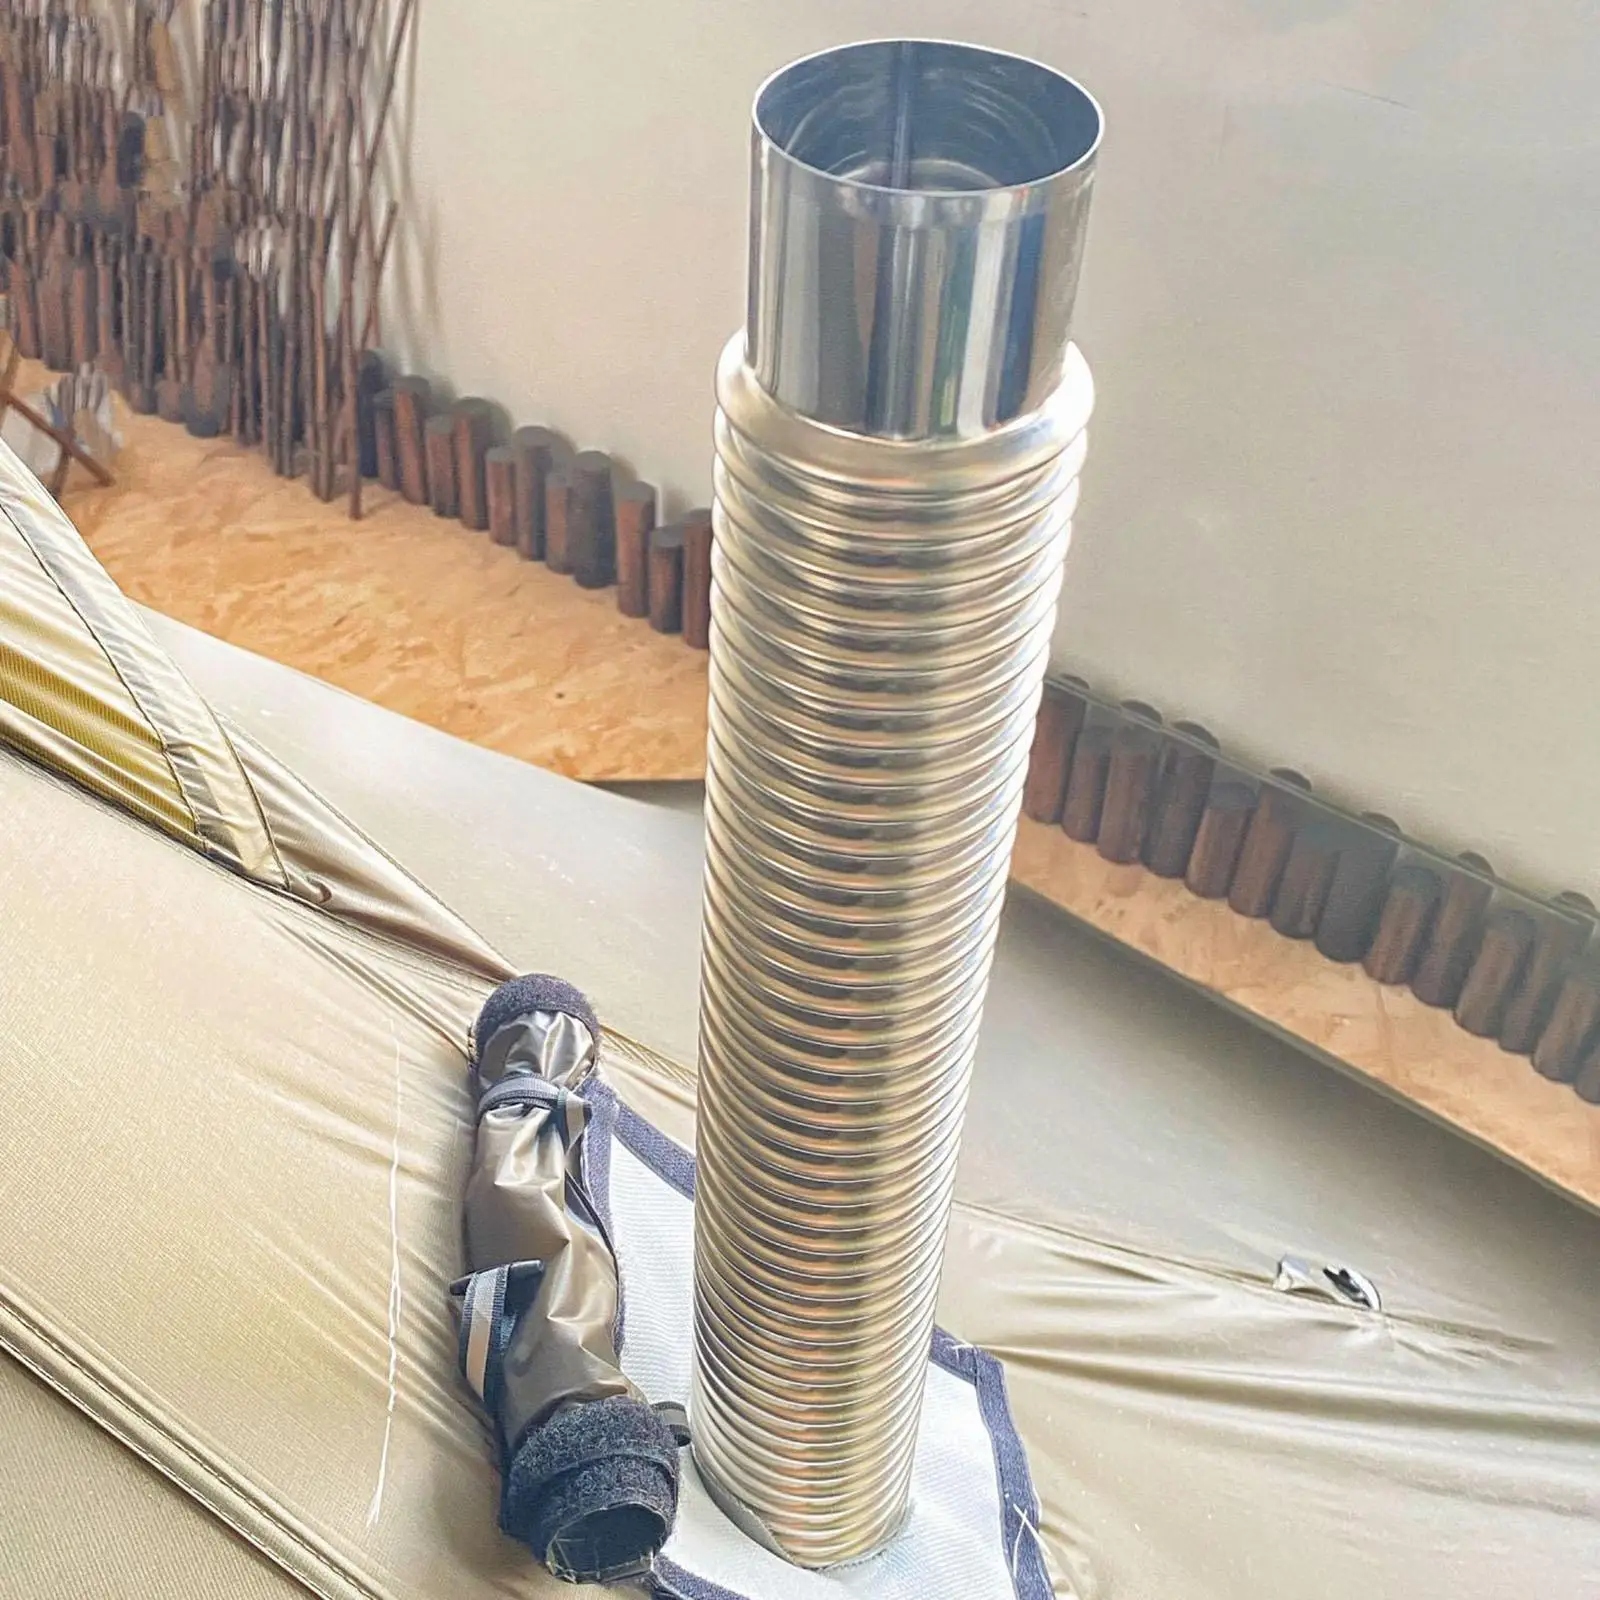 90 Degree Elbow Stove  Stainless Steel Chimney Exhaust  Bend  Flue for Outdoor  Fitting Connector Wood Stove Accessories